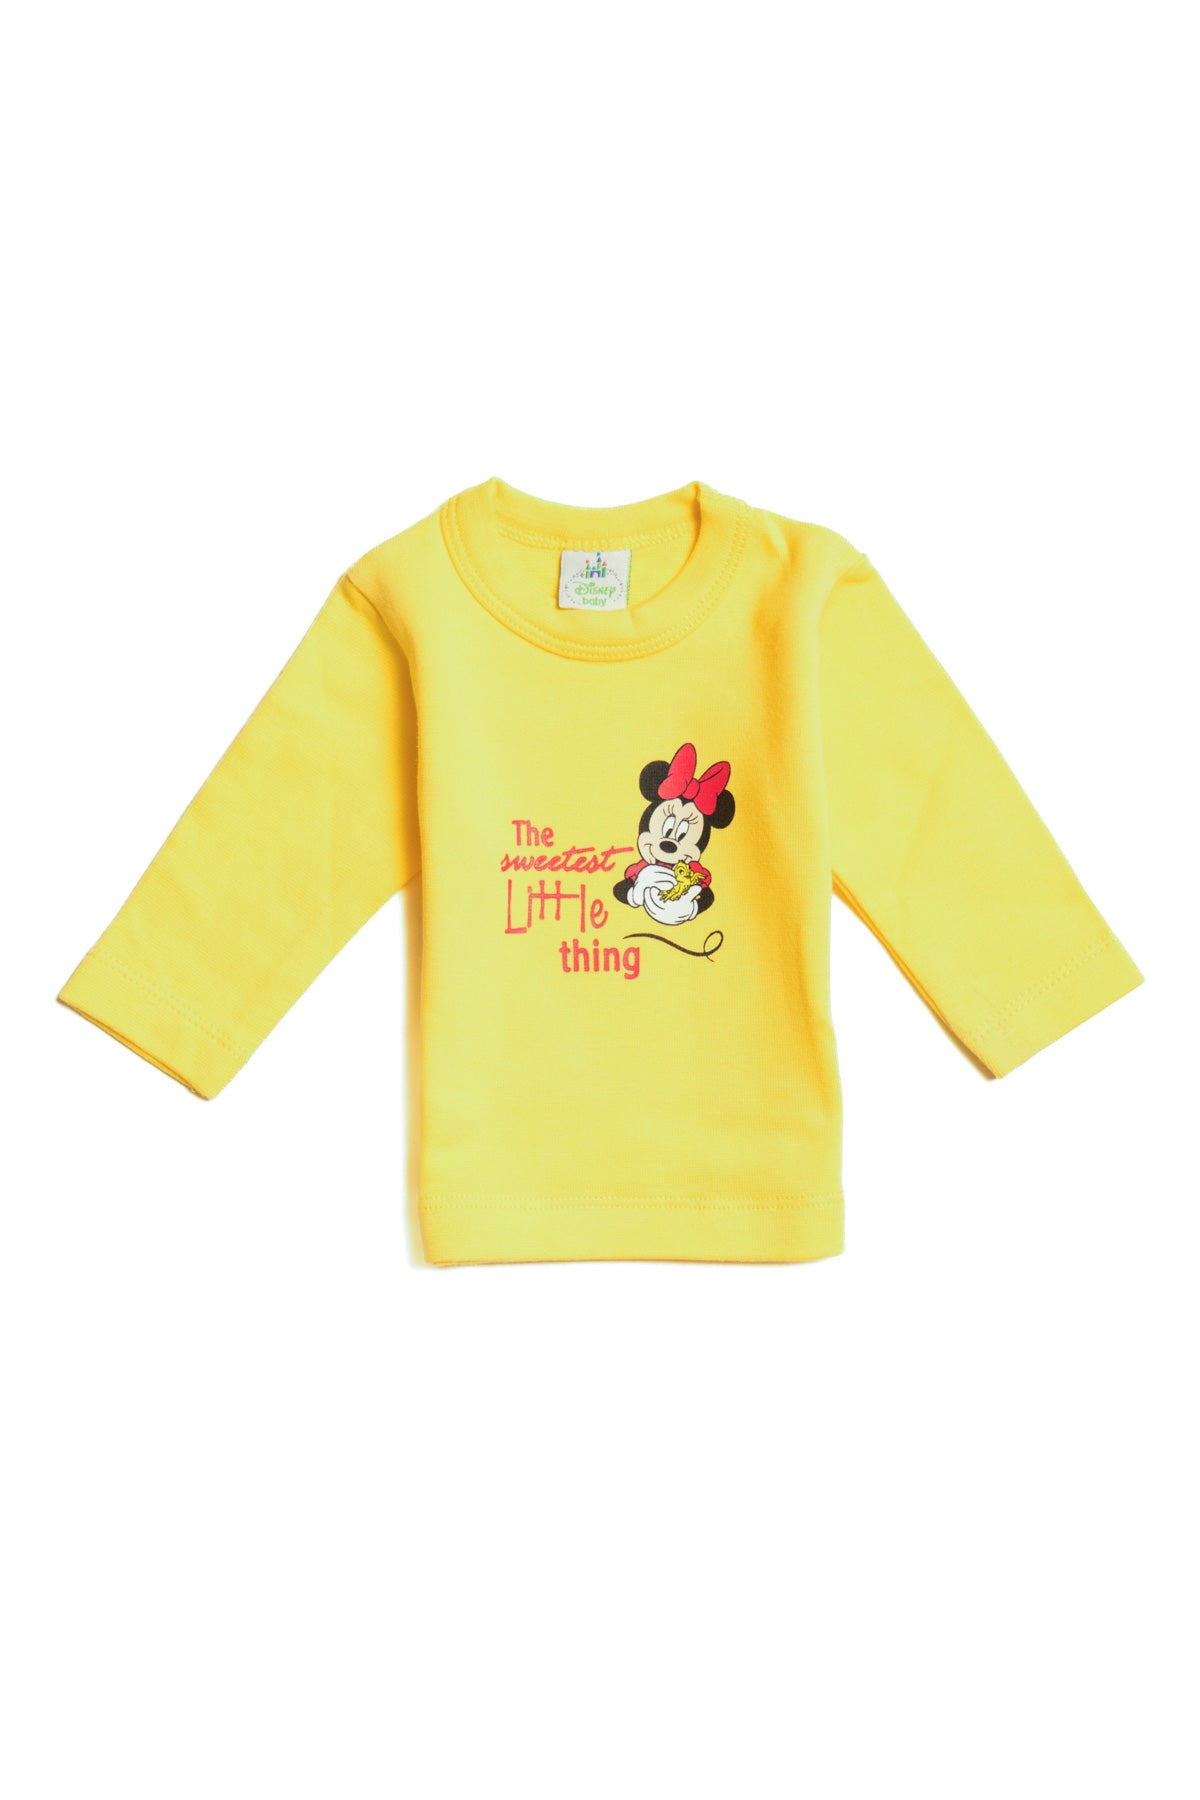 T-Shirt Baby Minnie " The Sweetest" Sleeve 4106